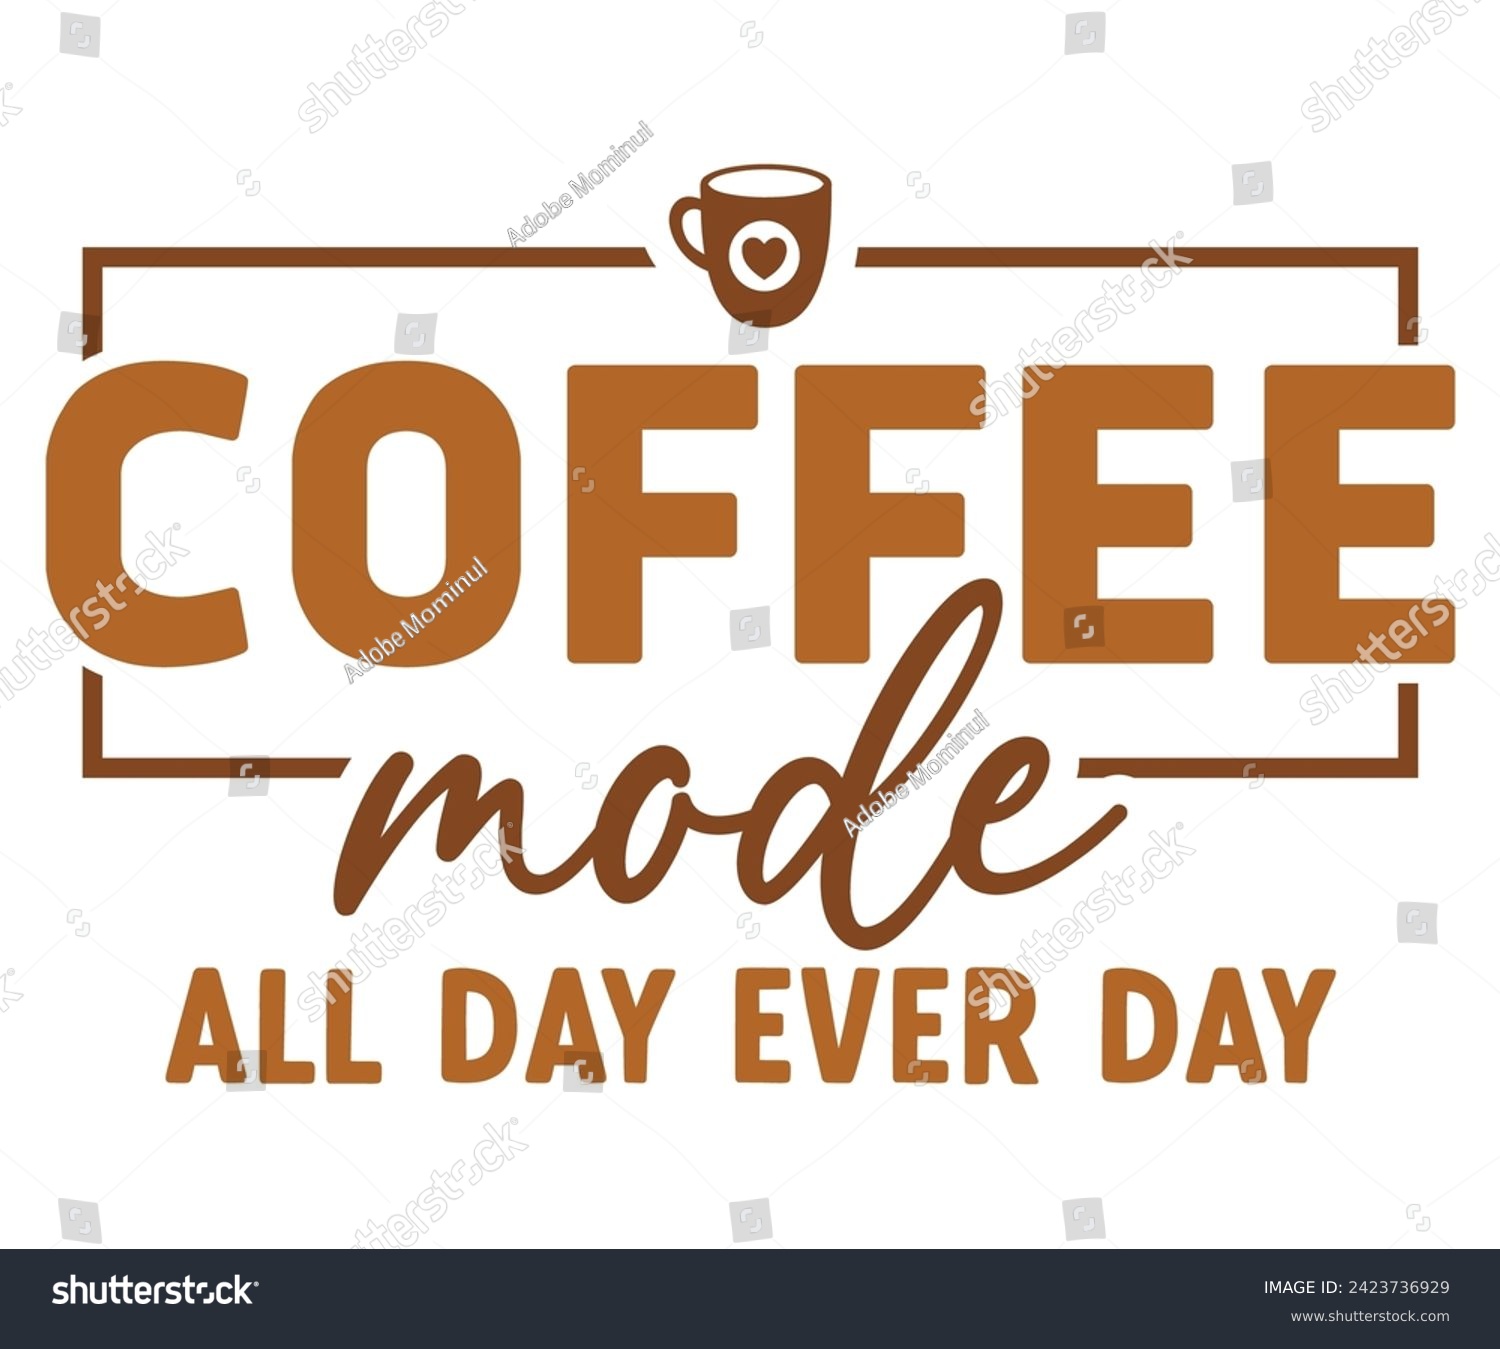 SVG of Coffee Mode All Day Every Svg,Coffee Svg,Coffee Retro,Funny Coffee Sayings,Coffee Mug Svg,Coffee Cup Svg,Gift For Coffee,Coffee Lover,Caffeine Svg,Svg Cut File,Coffee Quotes,Sublimation Design, svg